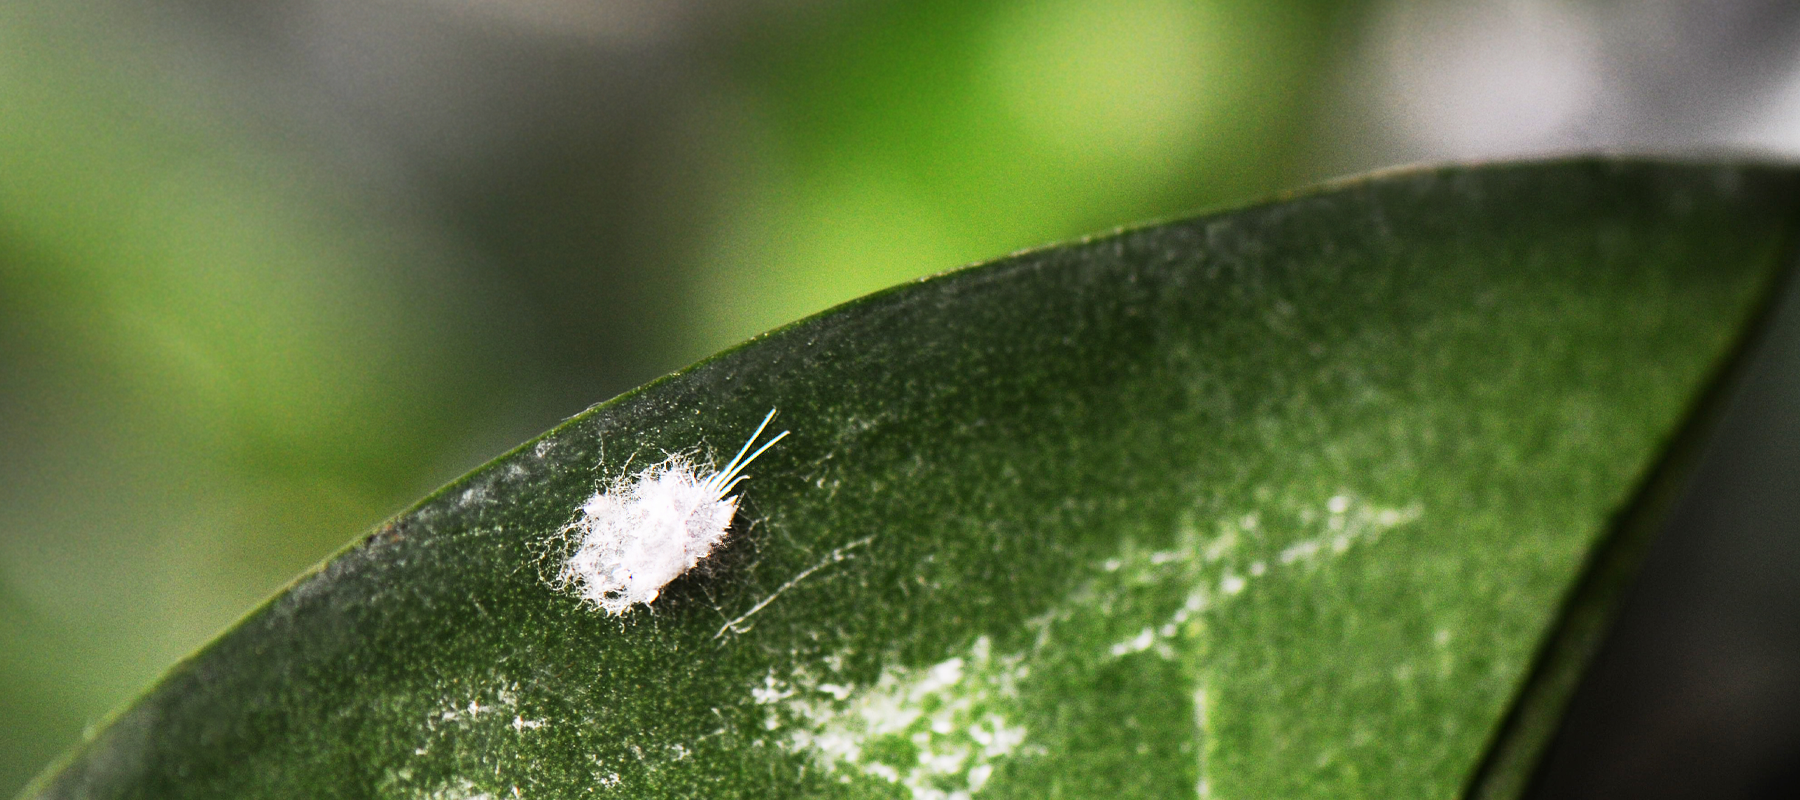 Defeating Mealy Bug Infestations: Your Guide to Protecting Indoor Plants